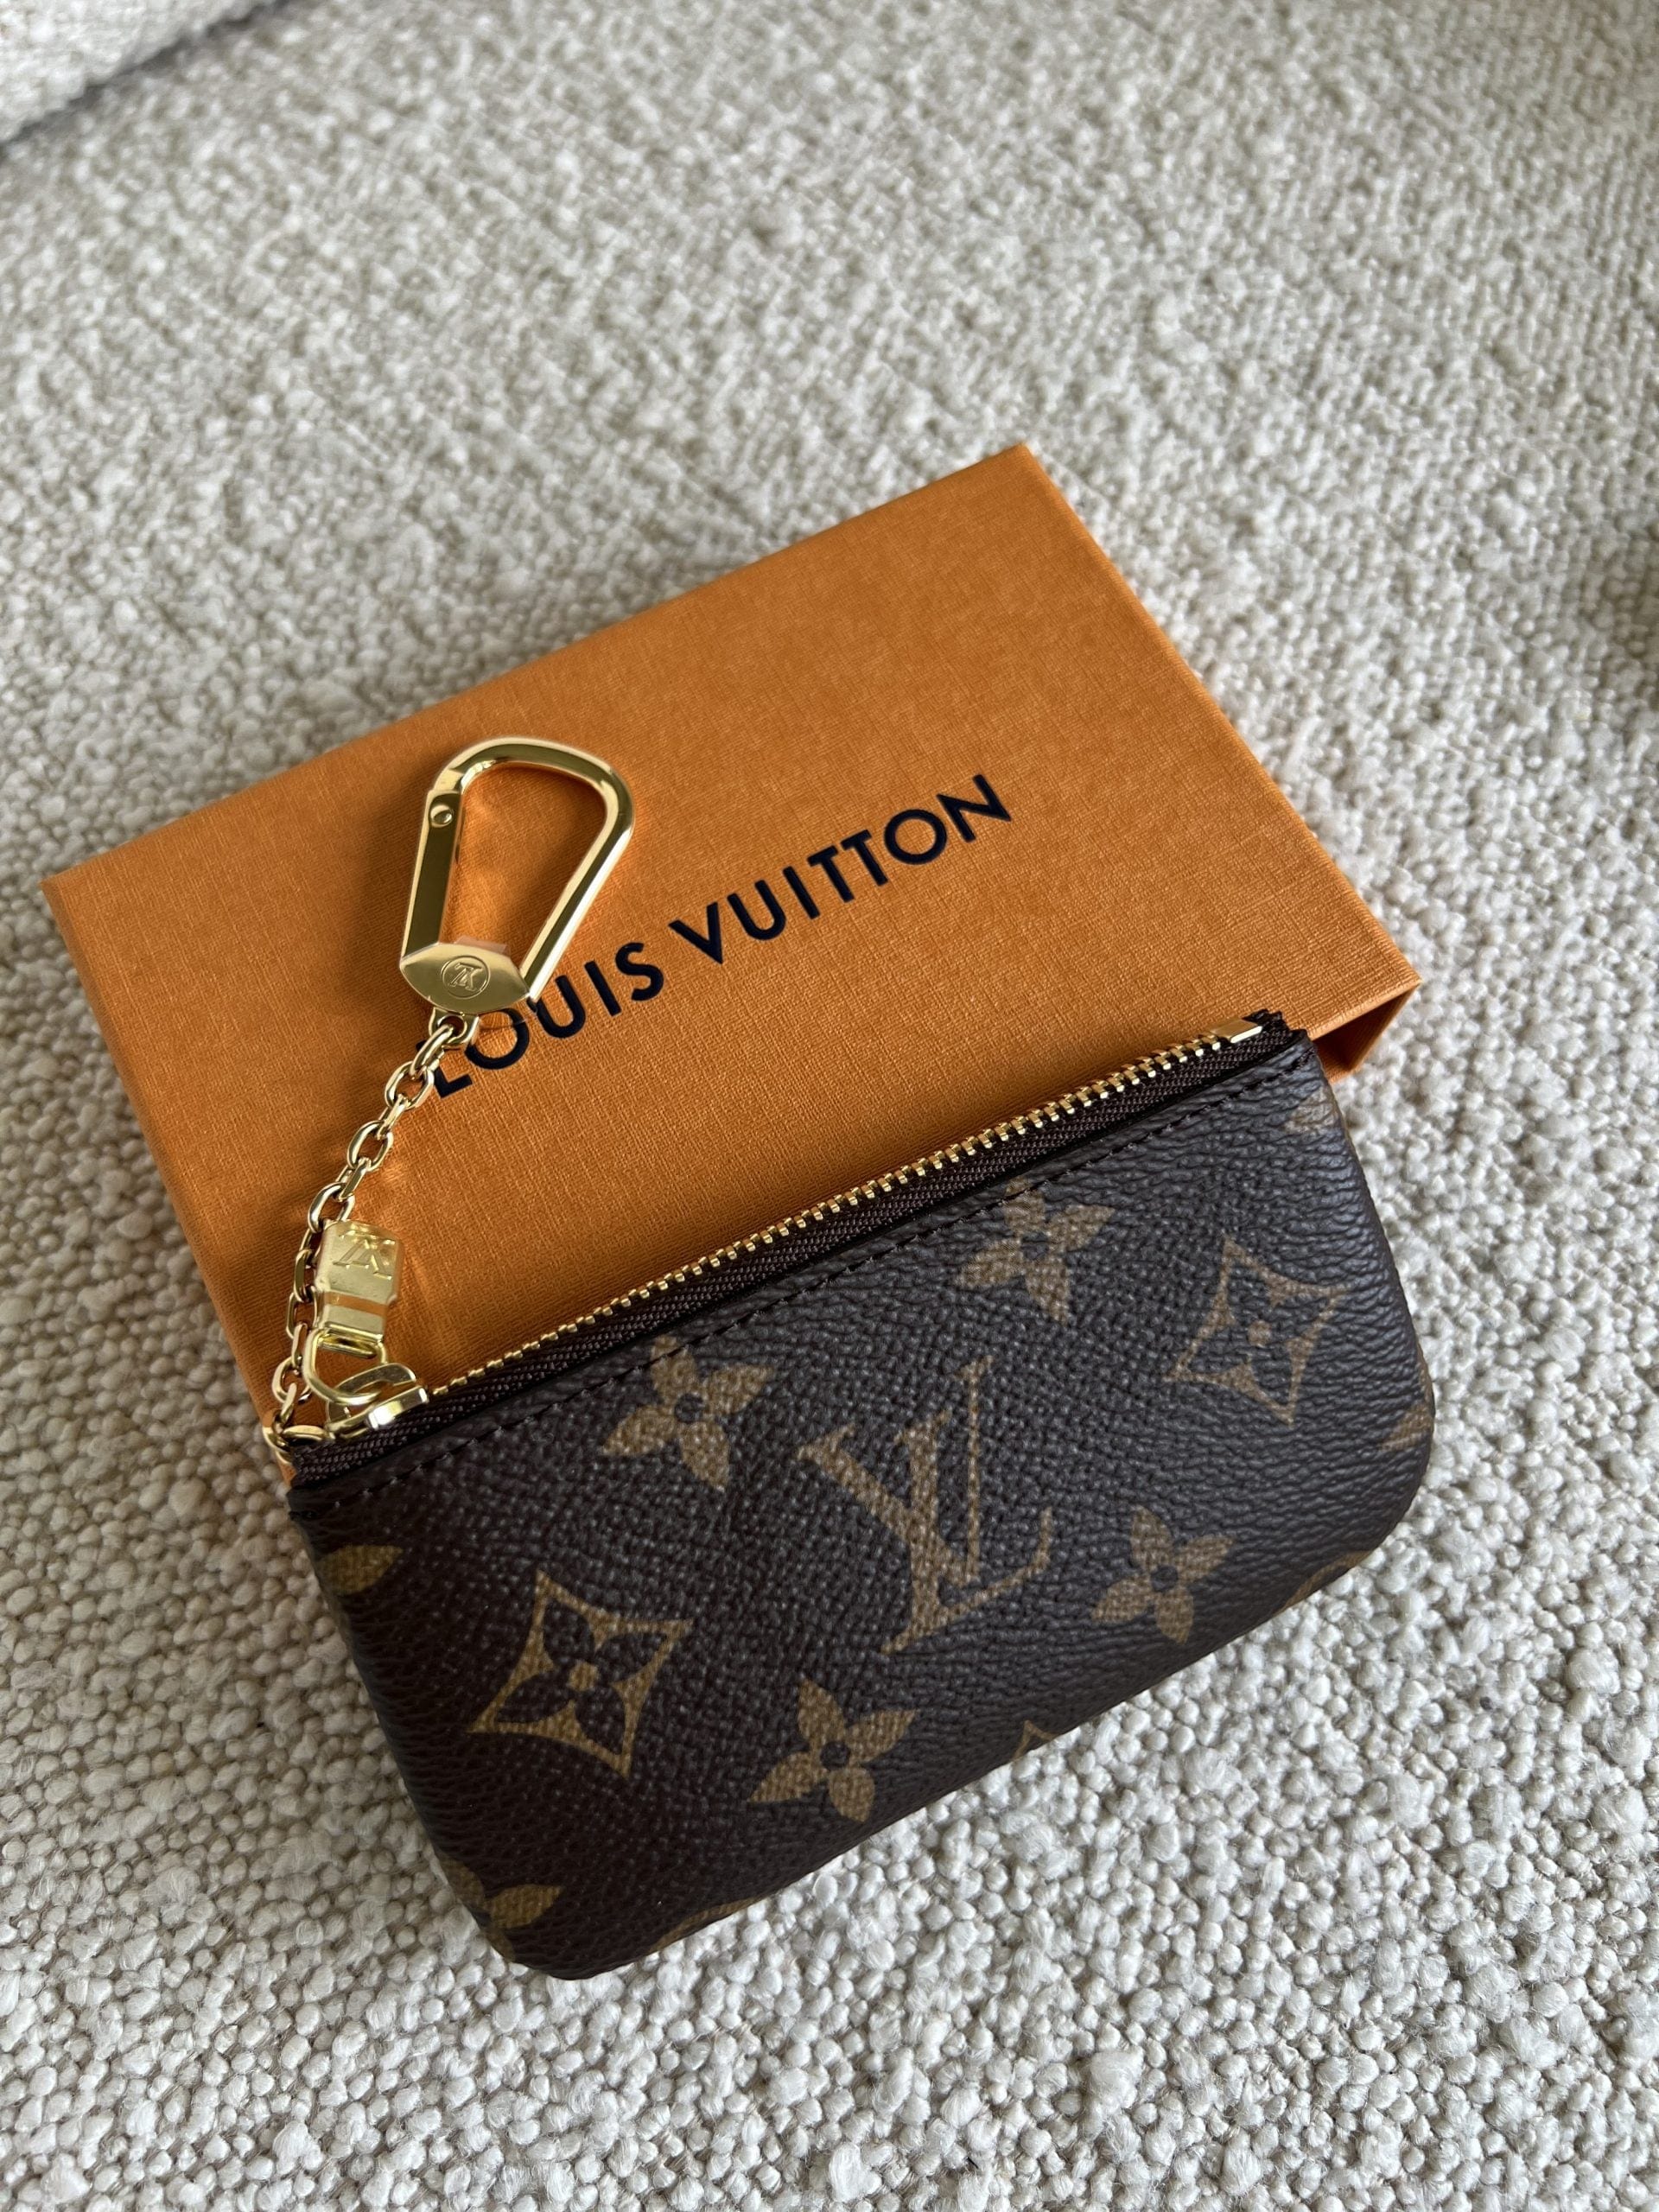 Buy LOUIS VUITTON Zipped Coin Purse at SALE | REDELUXE Luxury Pre-owned  Handbags